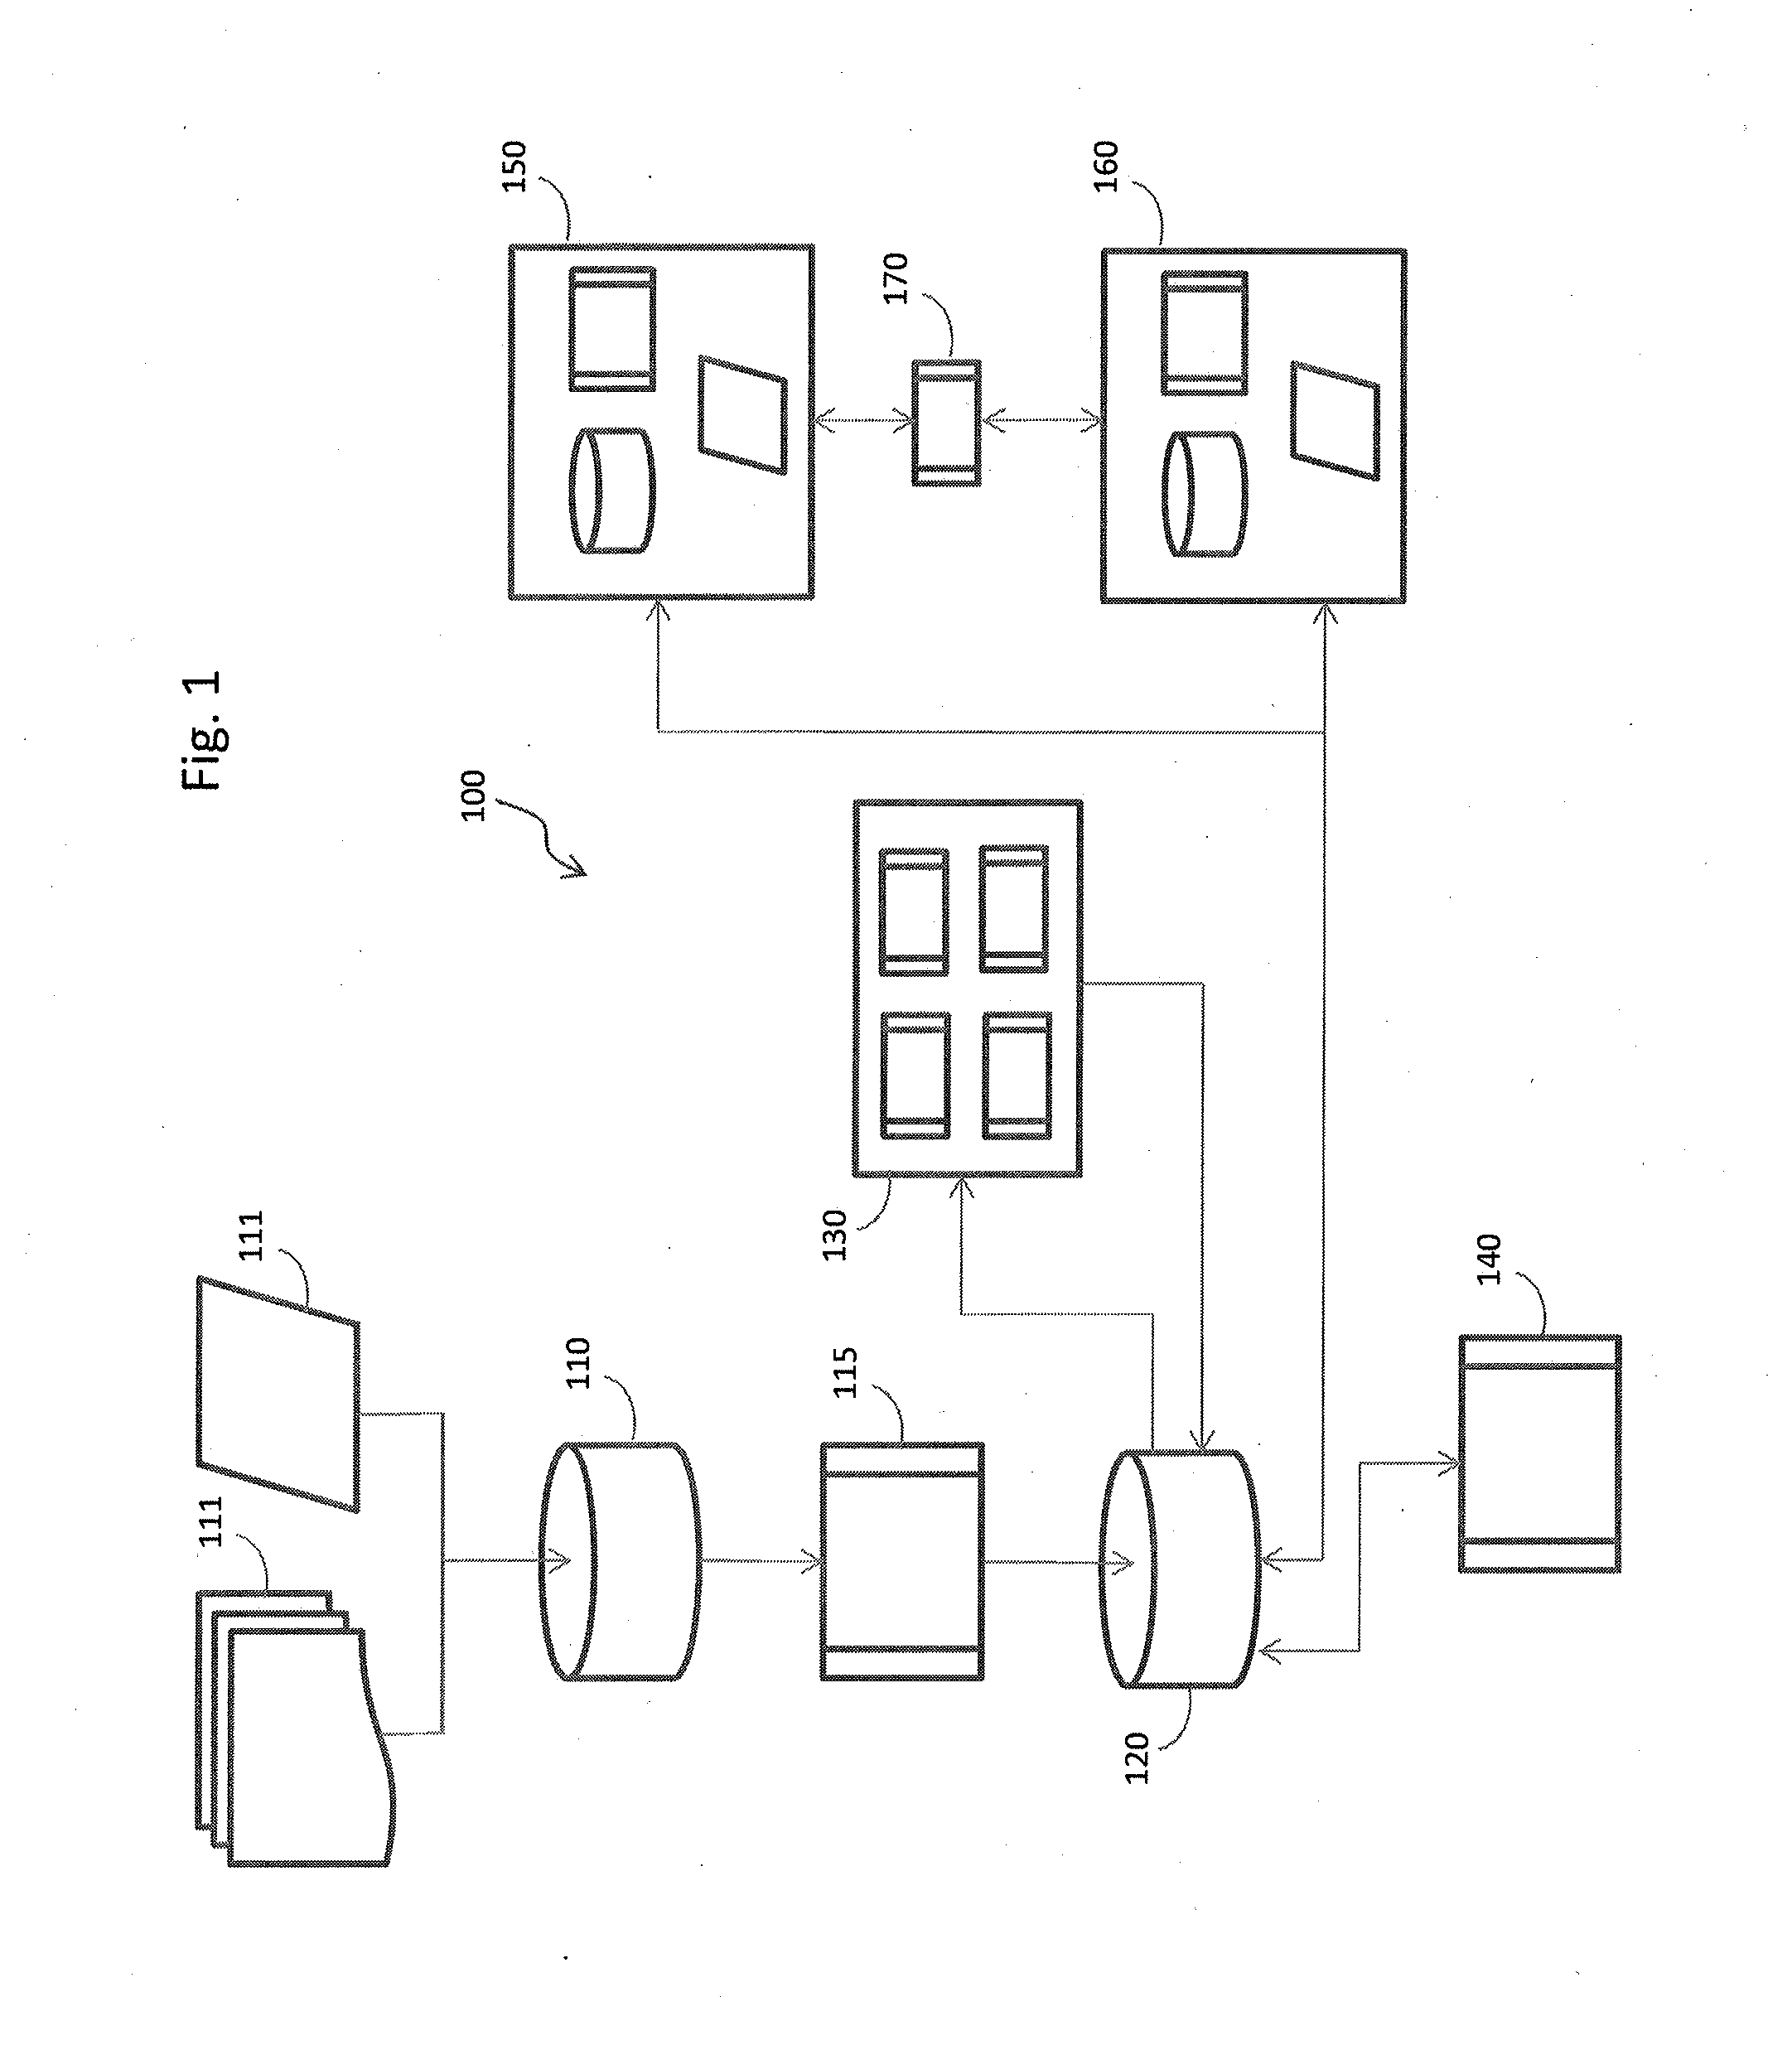 System, Method and Computer Program Product for Administering Consumer Care Initiatives